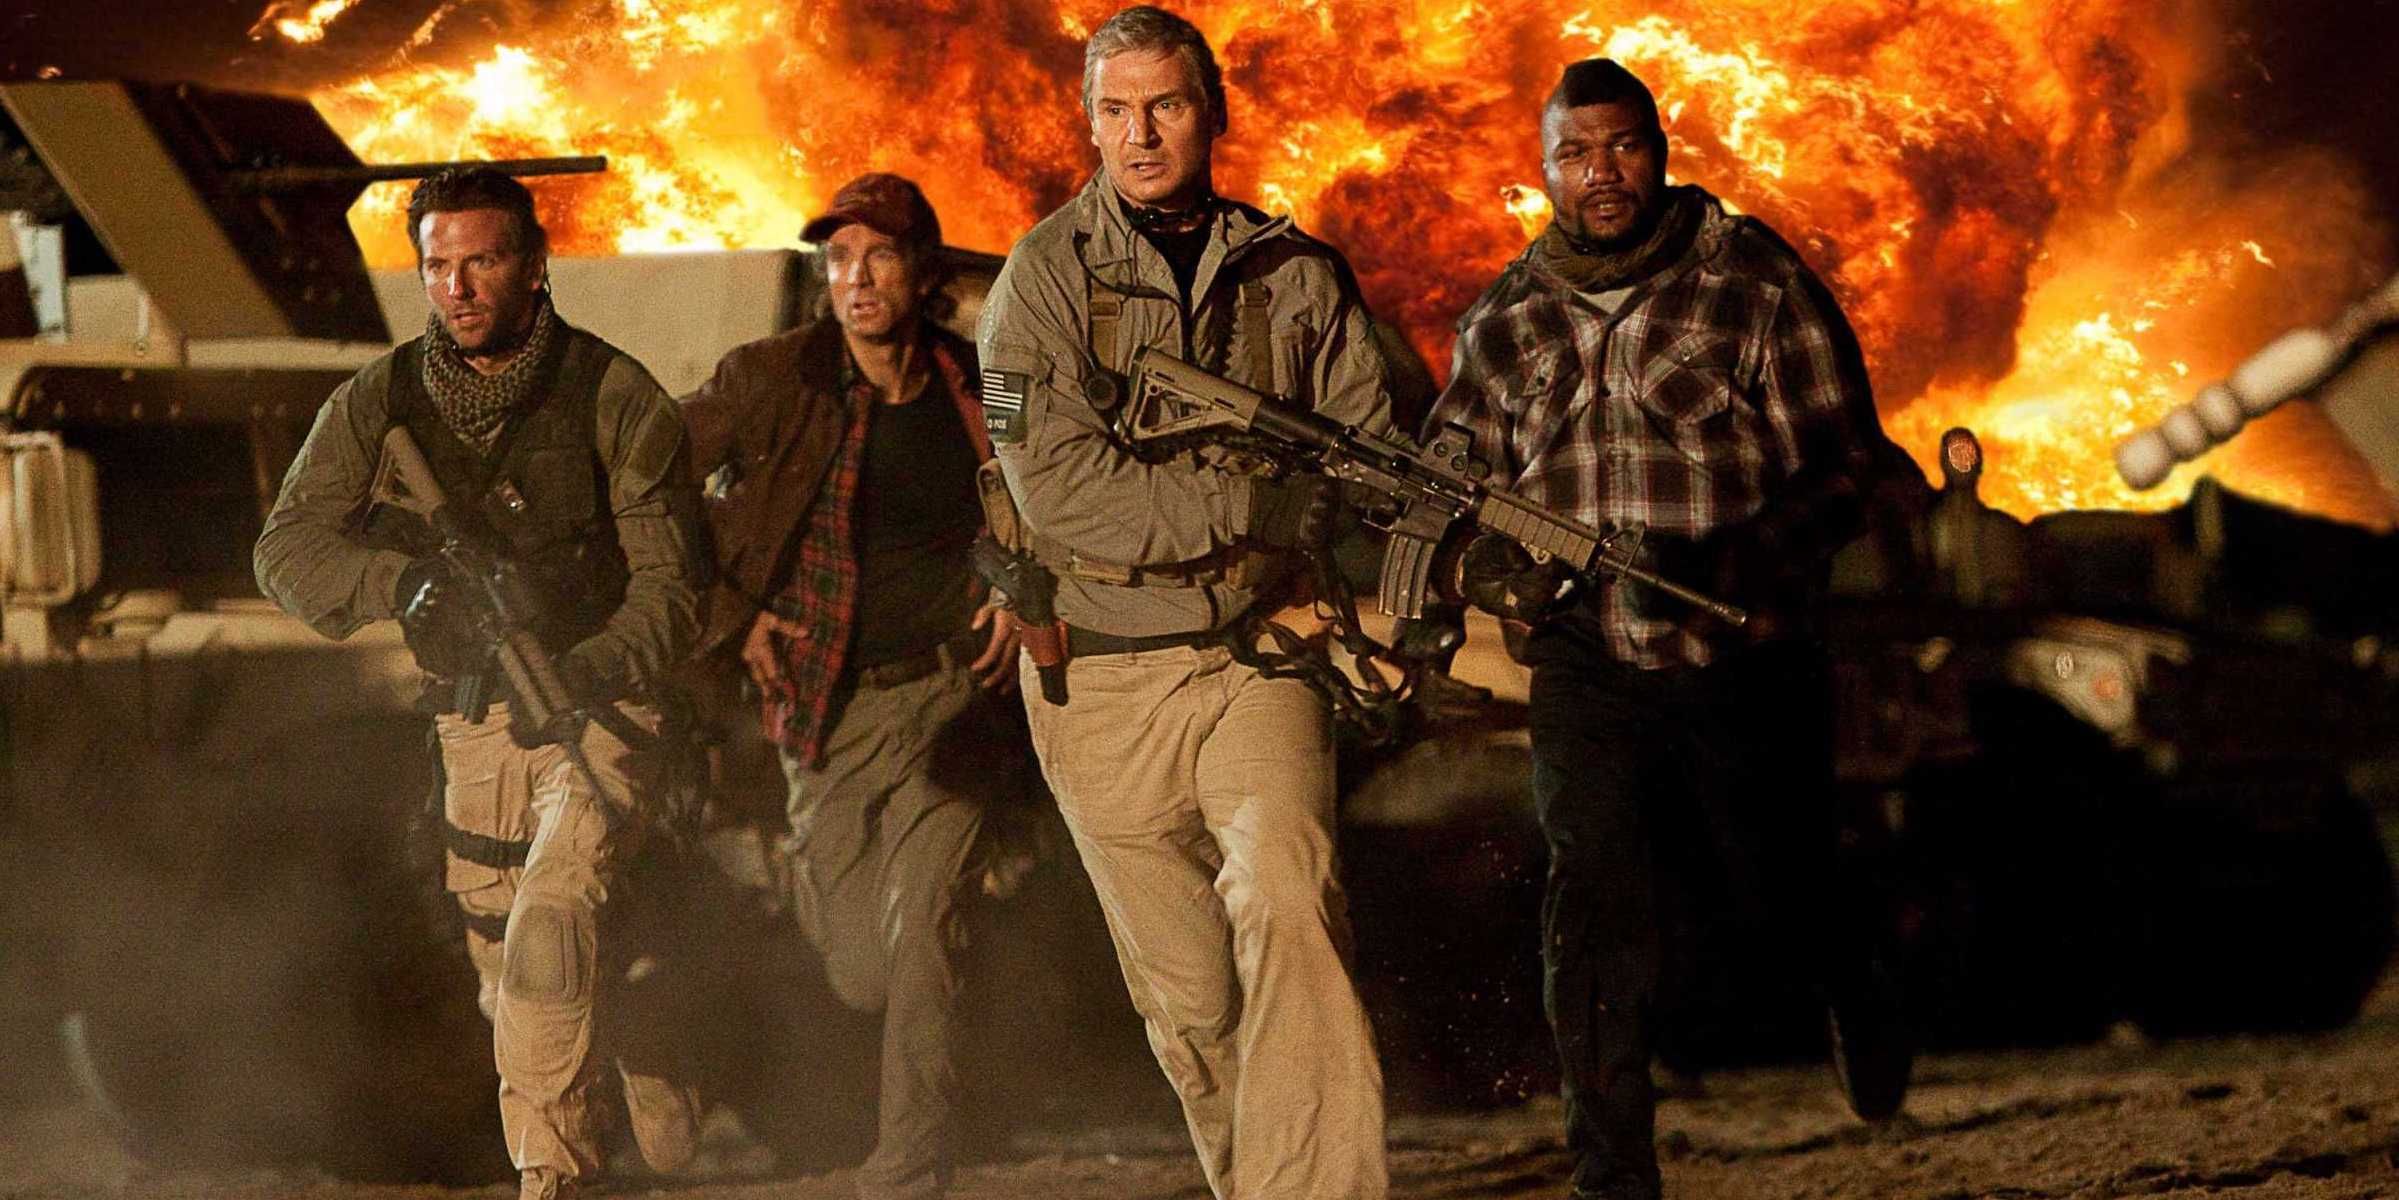 15 Action Movies To Watch If You Loved 6 Underground